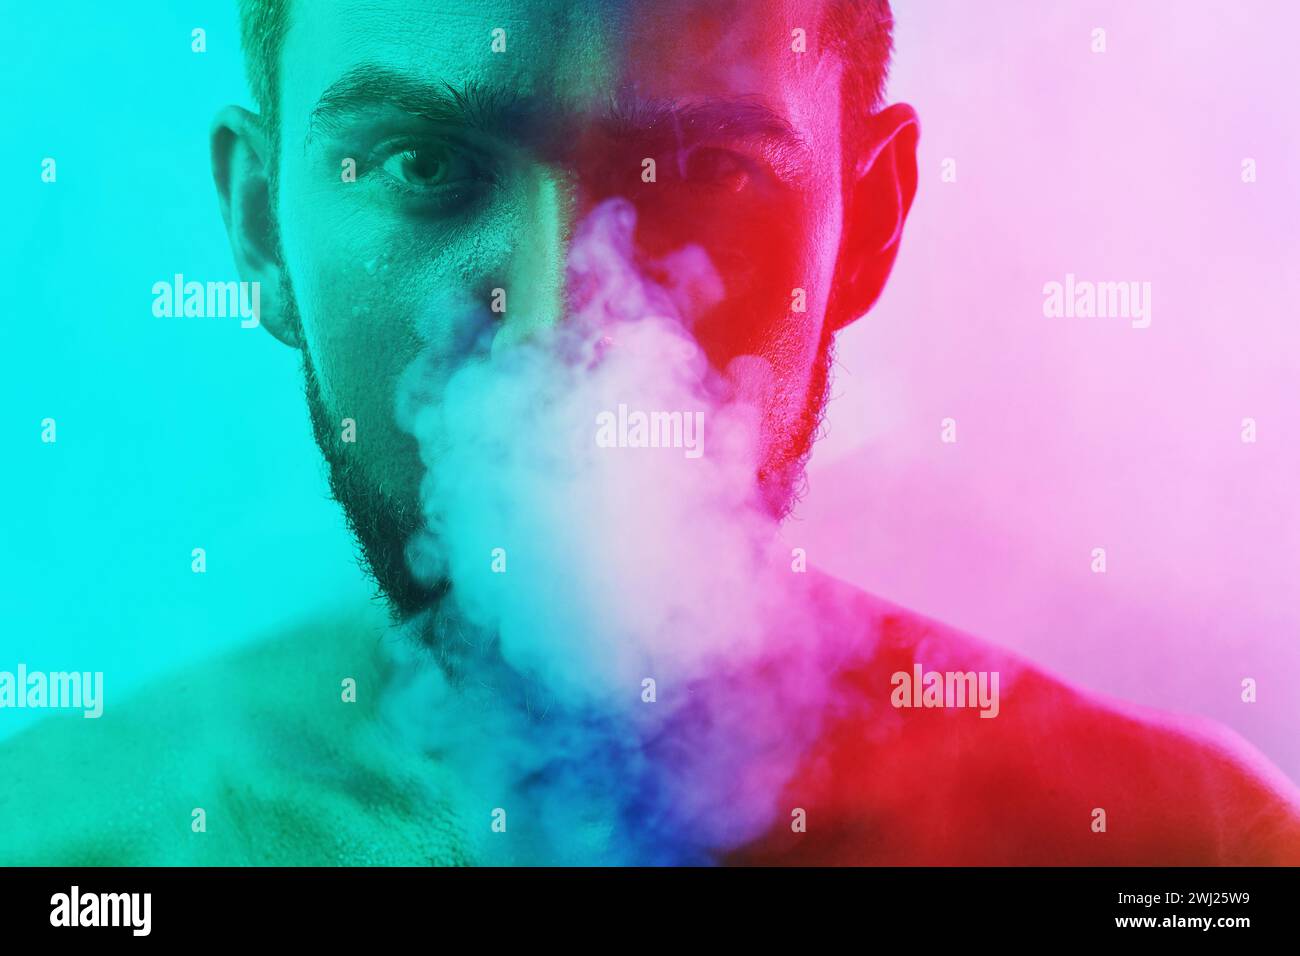 Handsome young man with wet skin in colorful light smoking cigarette or marijuana Stock Photo